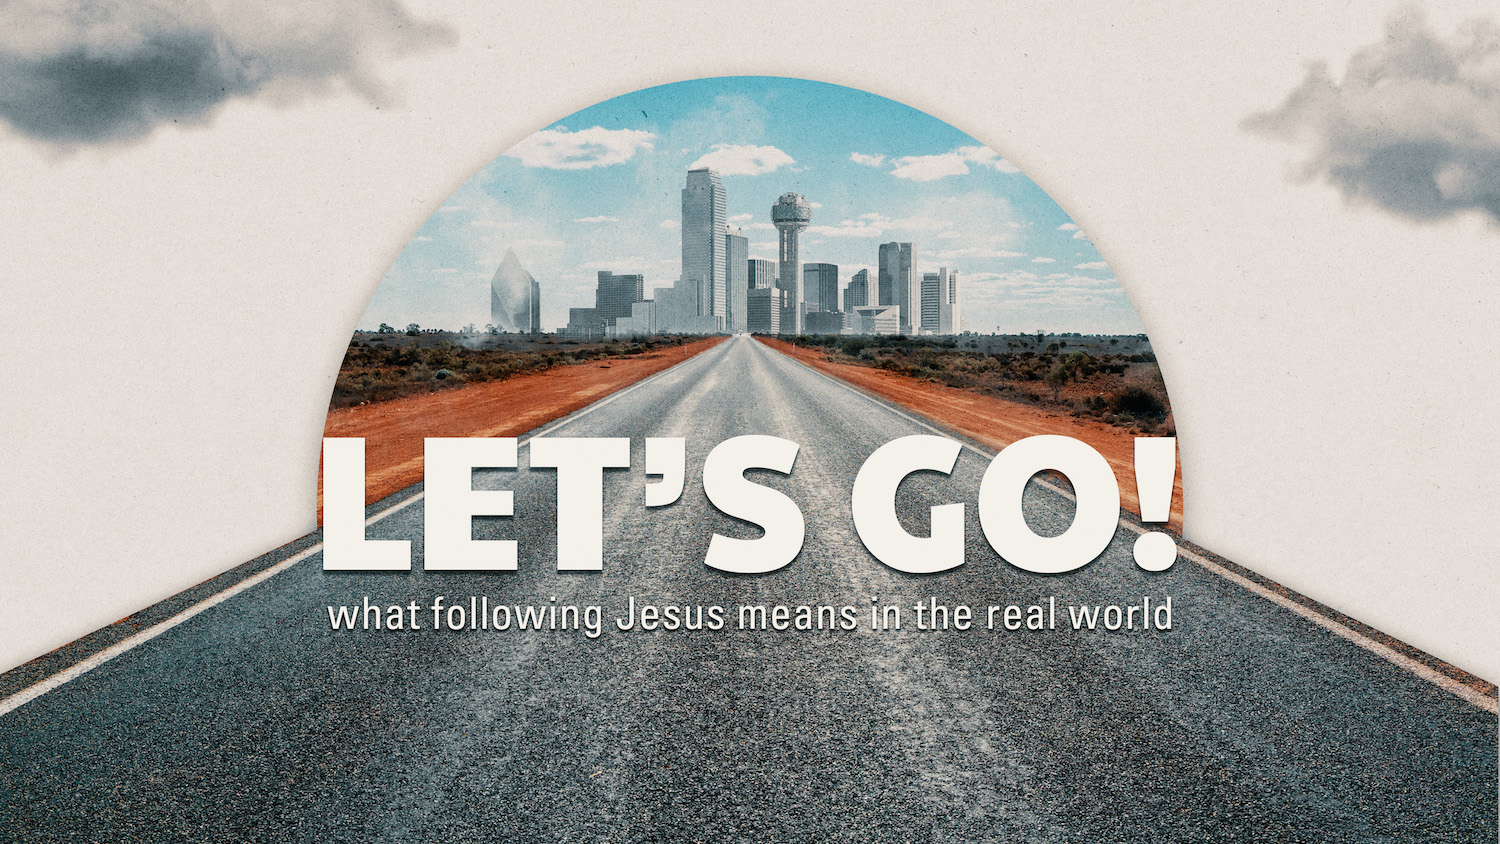 Let’s Go With the Gospel!